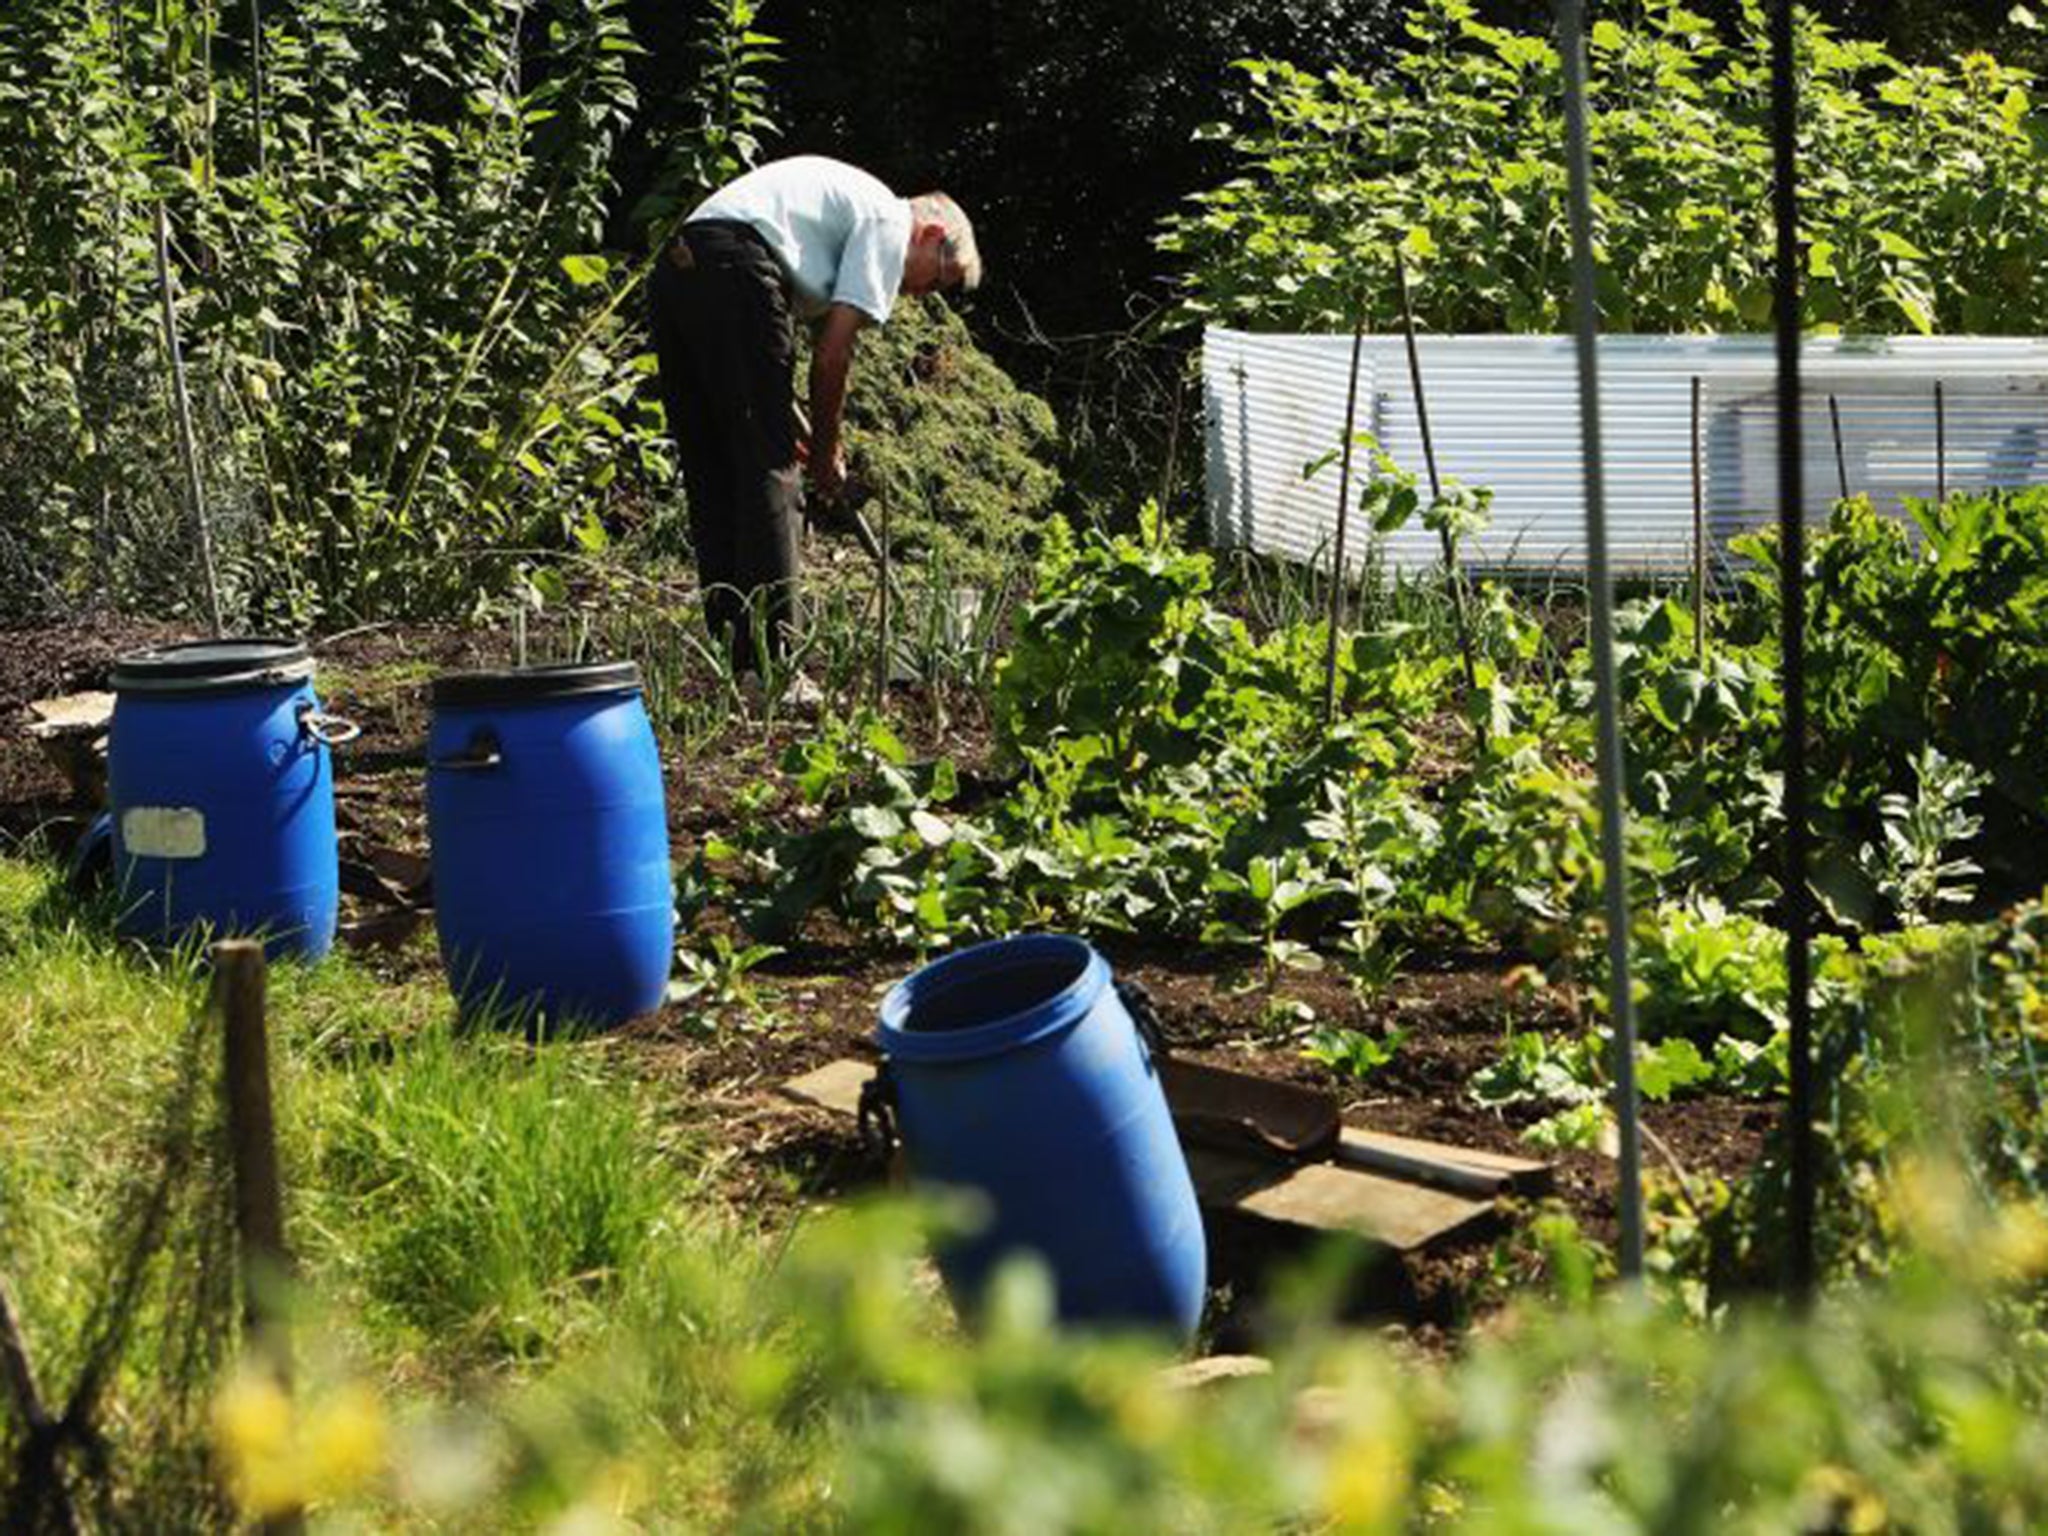 The threat to allotments amounts to the largest seizure of common land since the 18th century